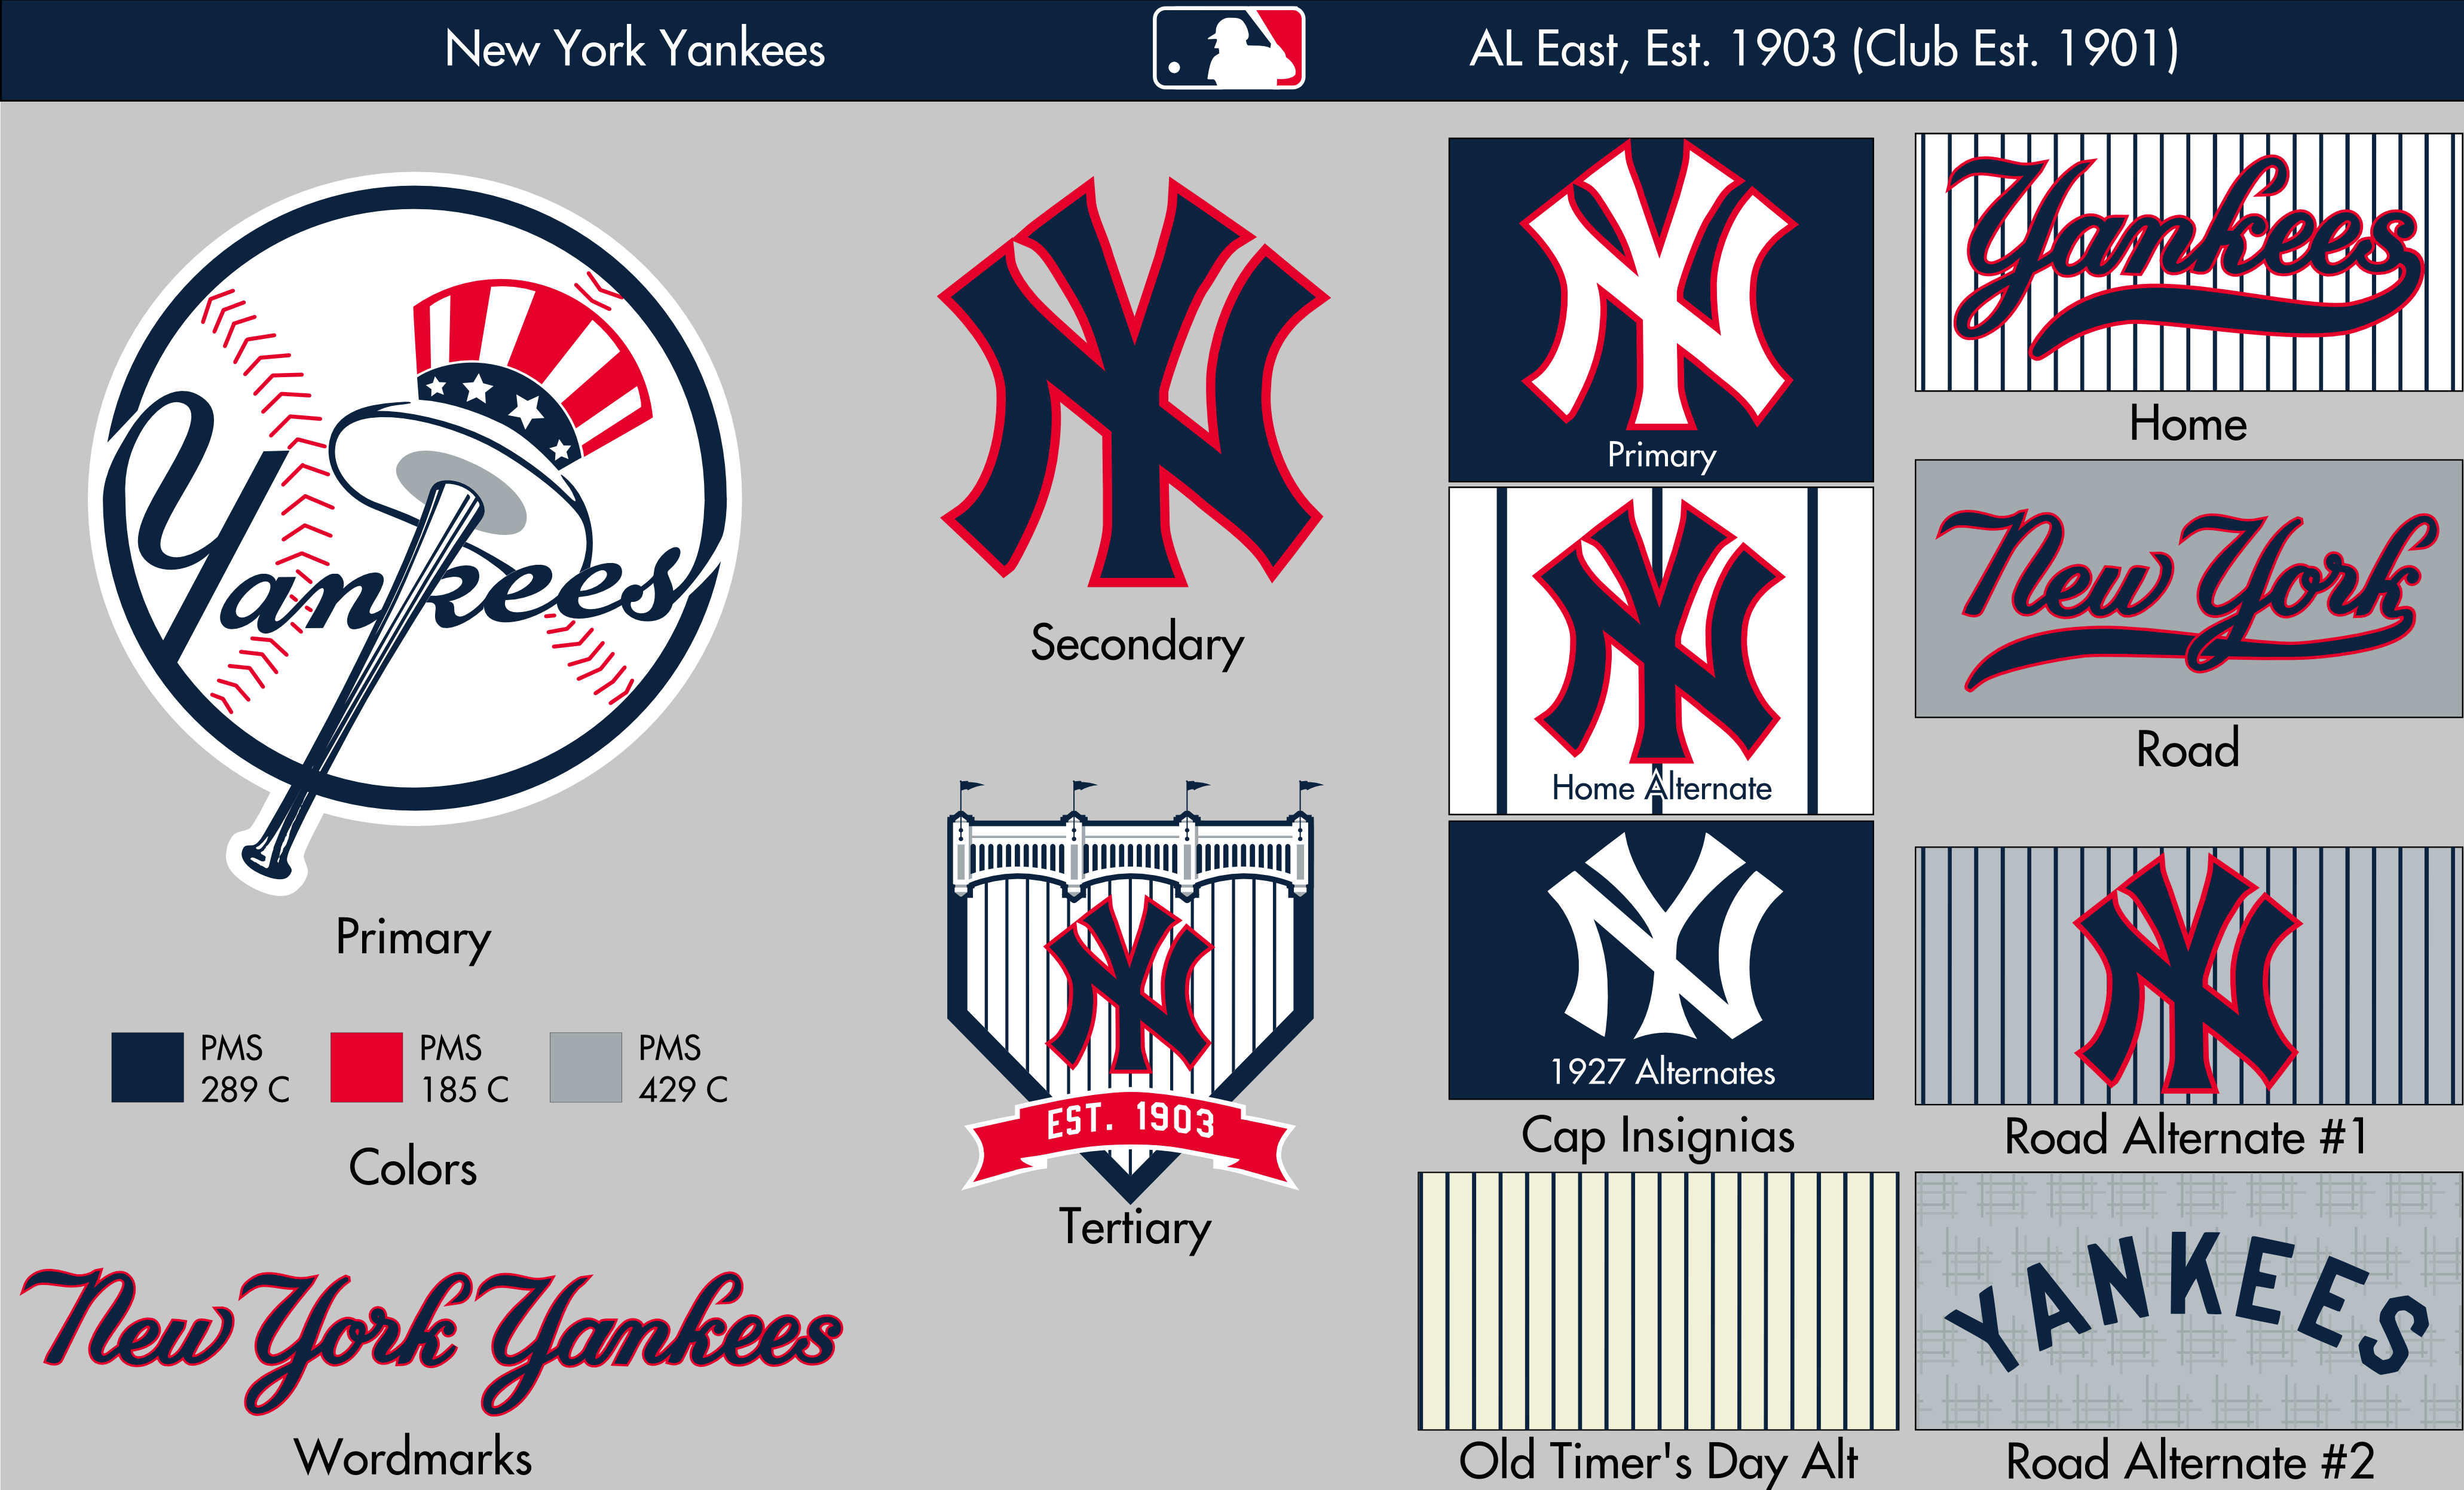 Old Yankees Logo - MLB: Project 32 - New Dugout Jackets Added - Page 3 - Concepts ...